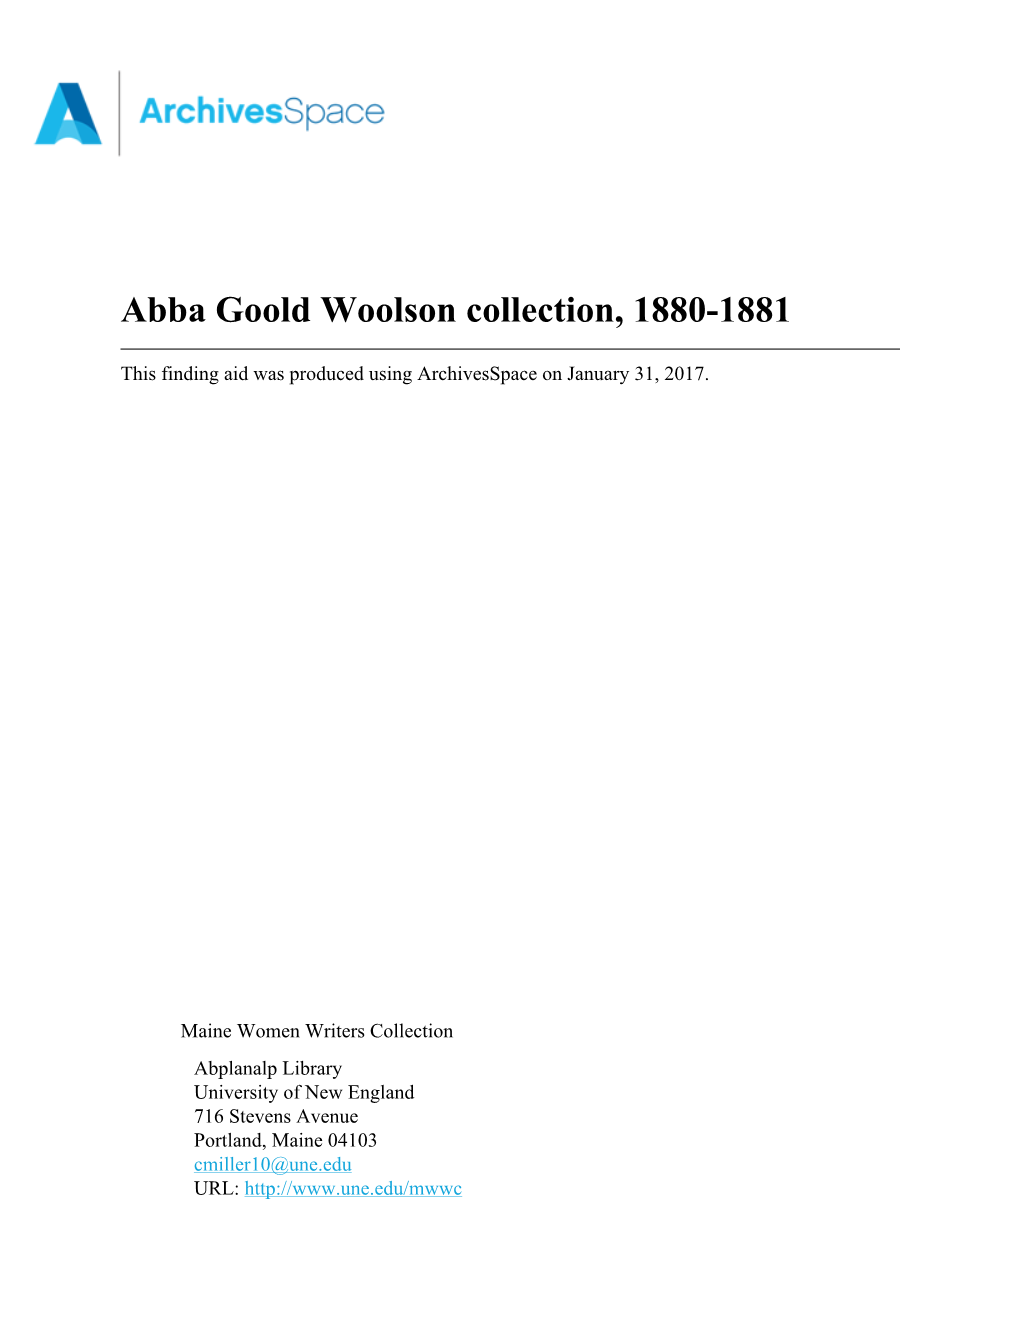 Abba Goold Woolson Collection, 1880-1881